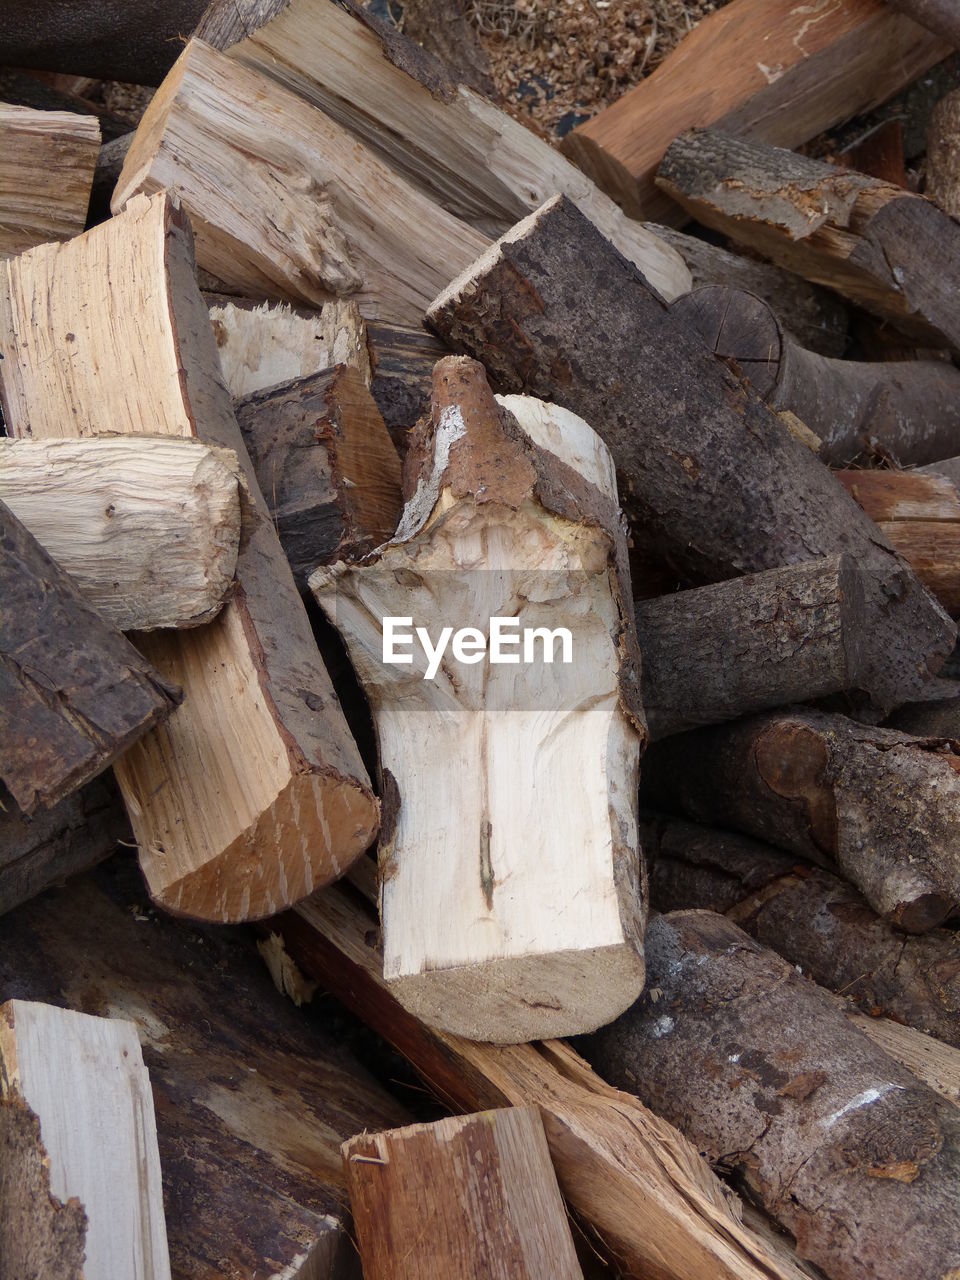 CLOSE-UP OF LOGS STACK